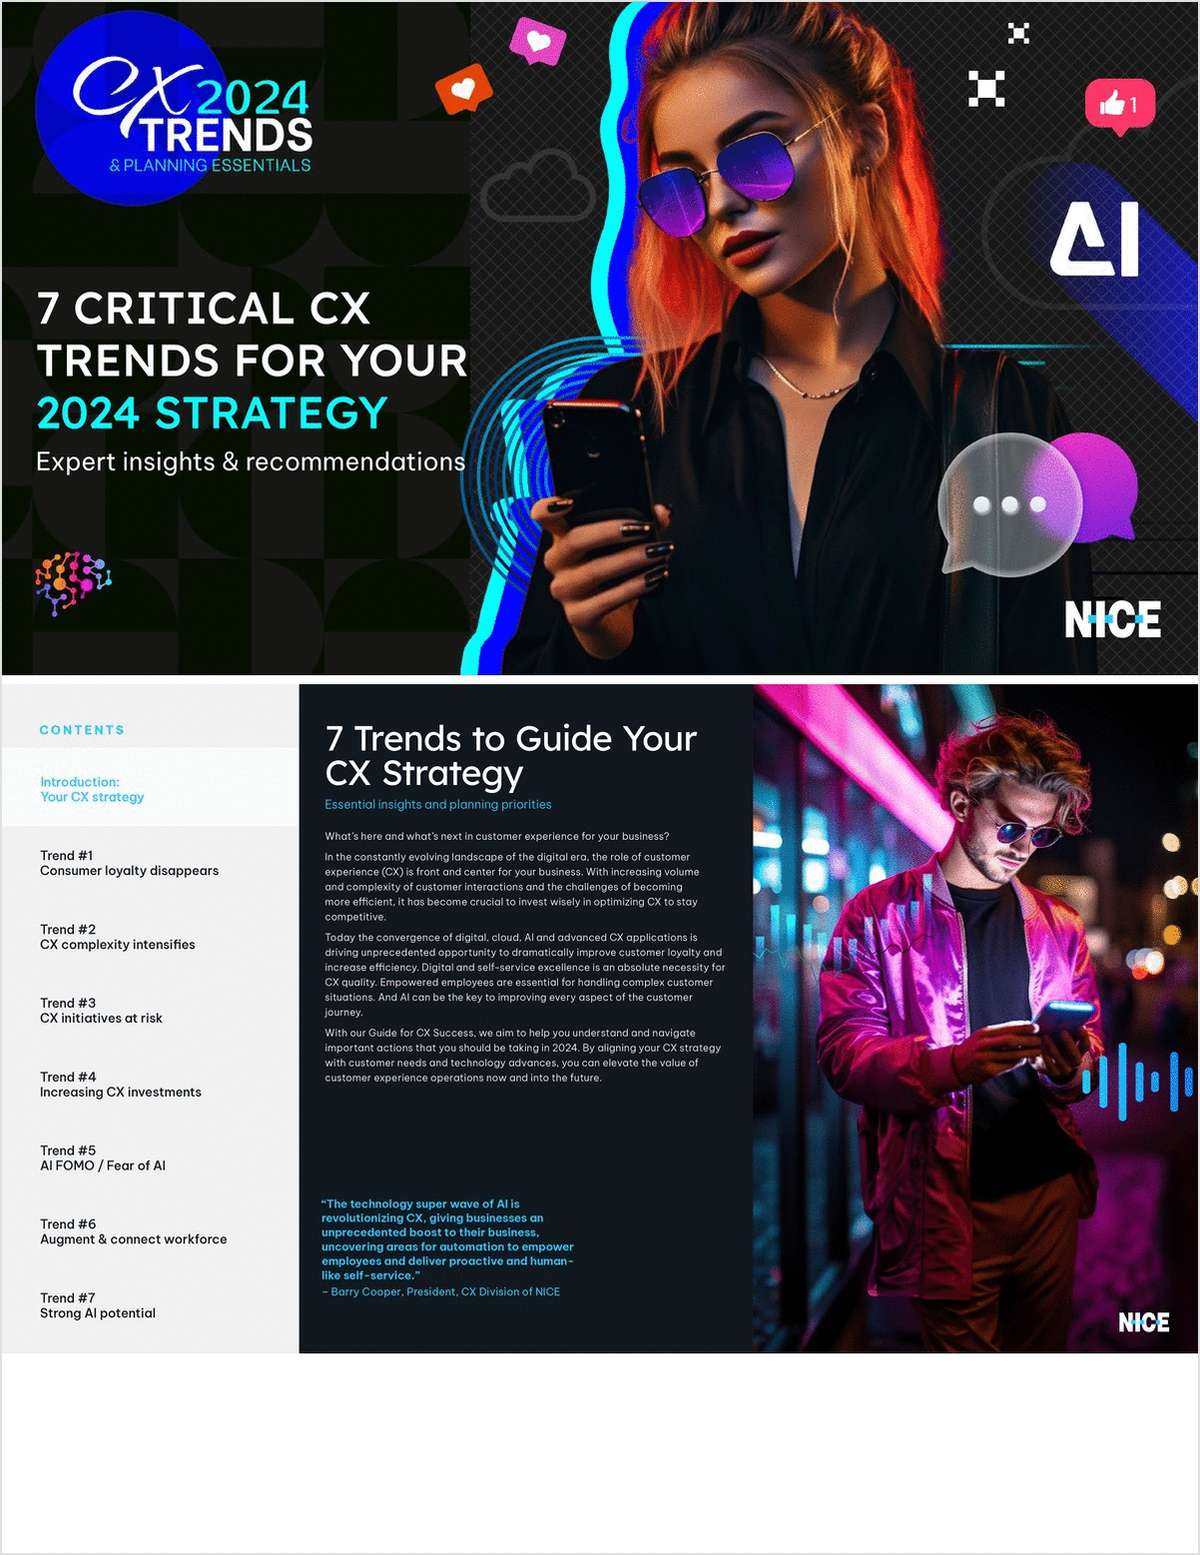 7 CRITICAL CX TRENDS FOR YOUR 2024 STRATEGY